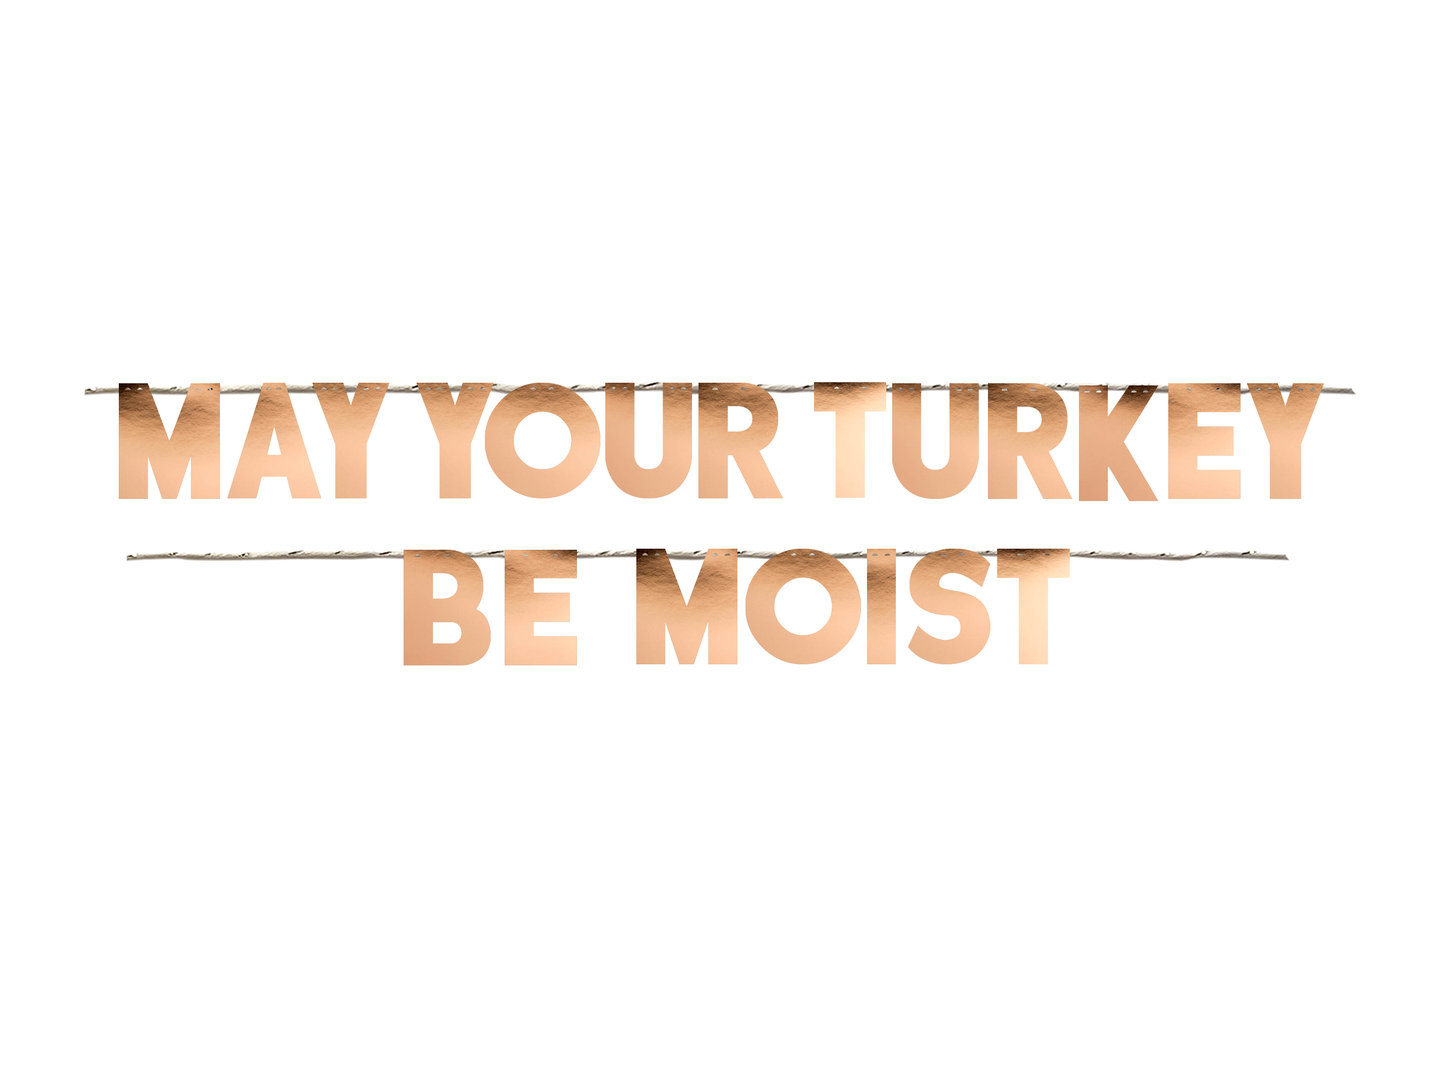 MAY YOUR TURKEY BE MOIST